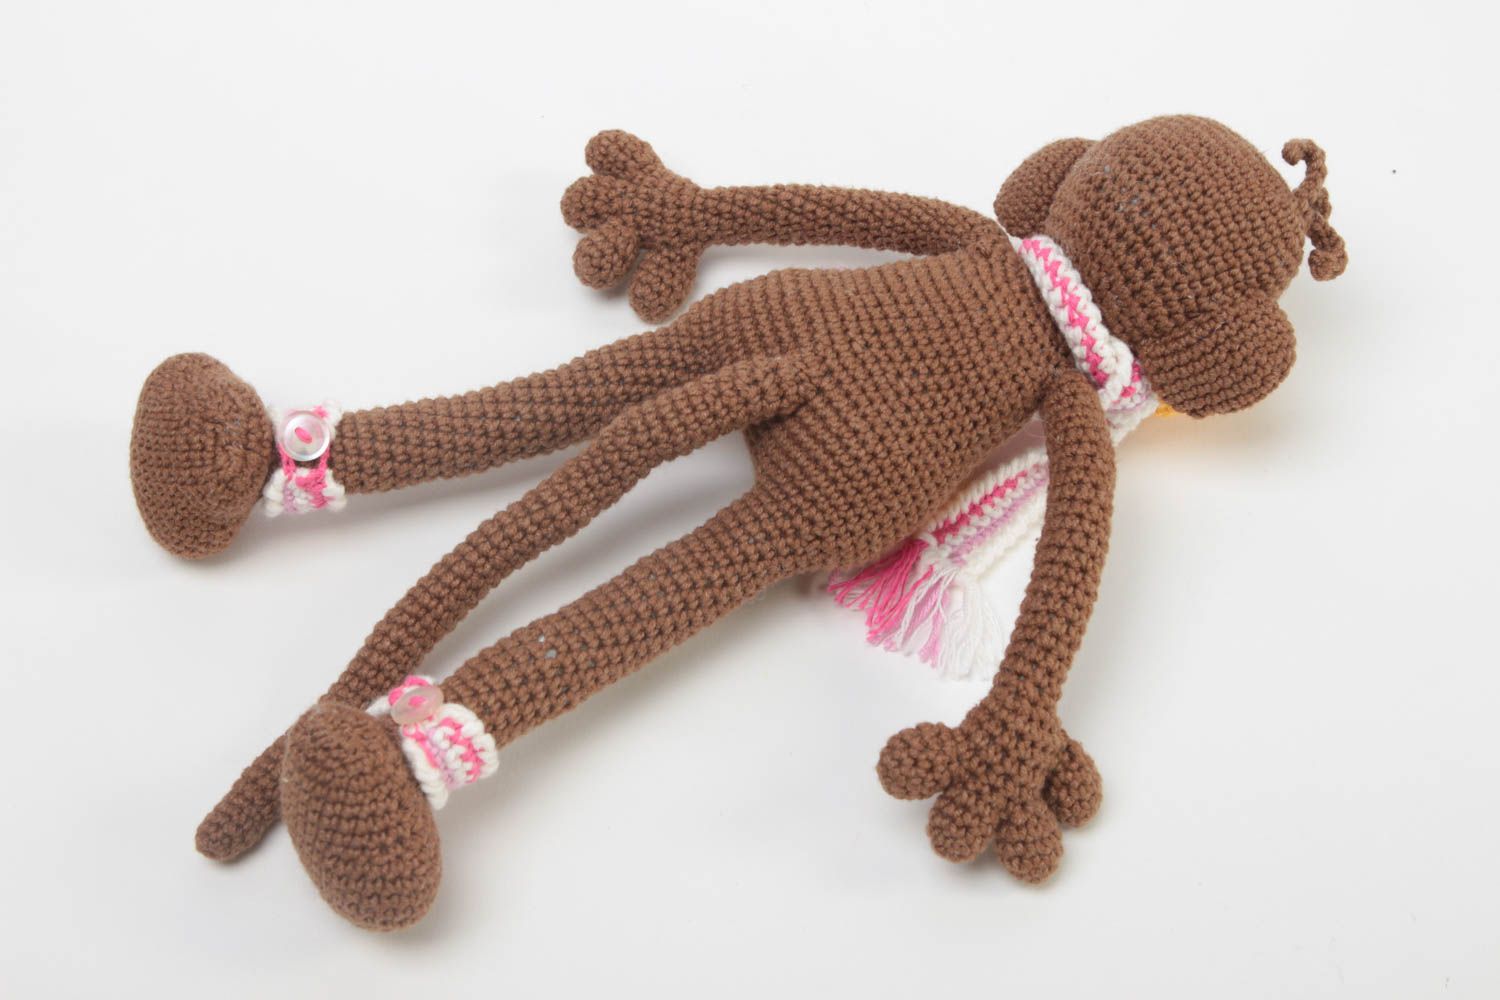 Cute handmade childrens toys crochet soft toy stuffed monkey toy gifts for kids photo 4